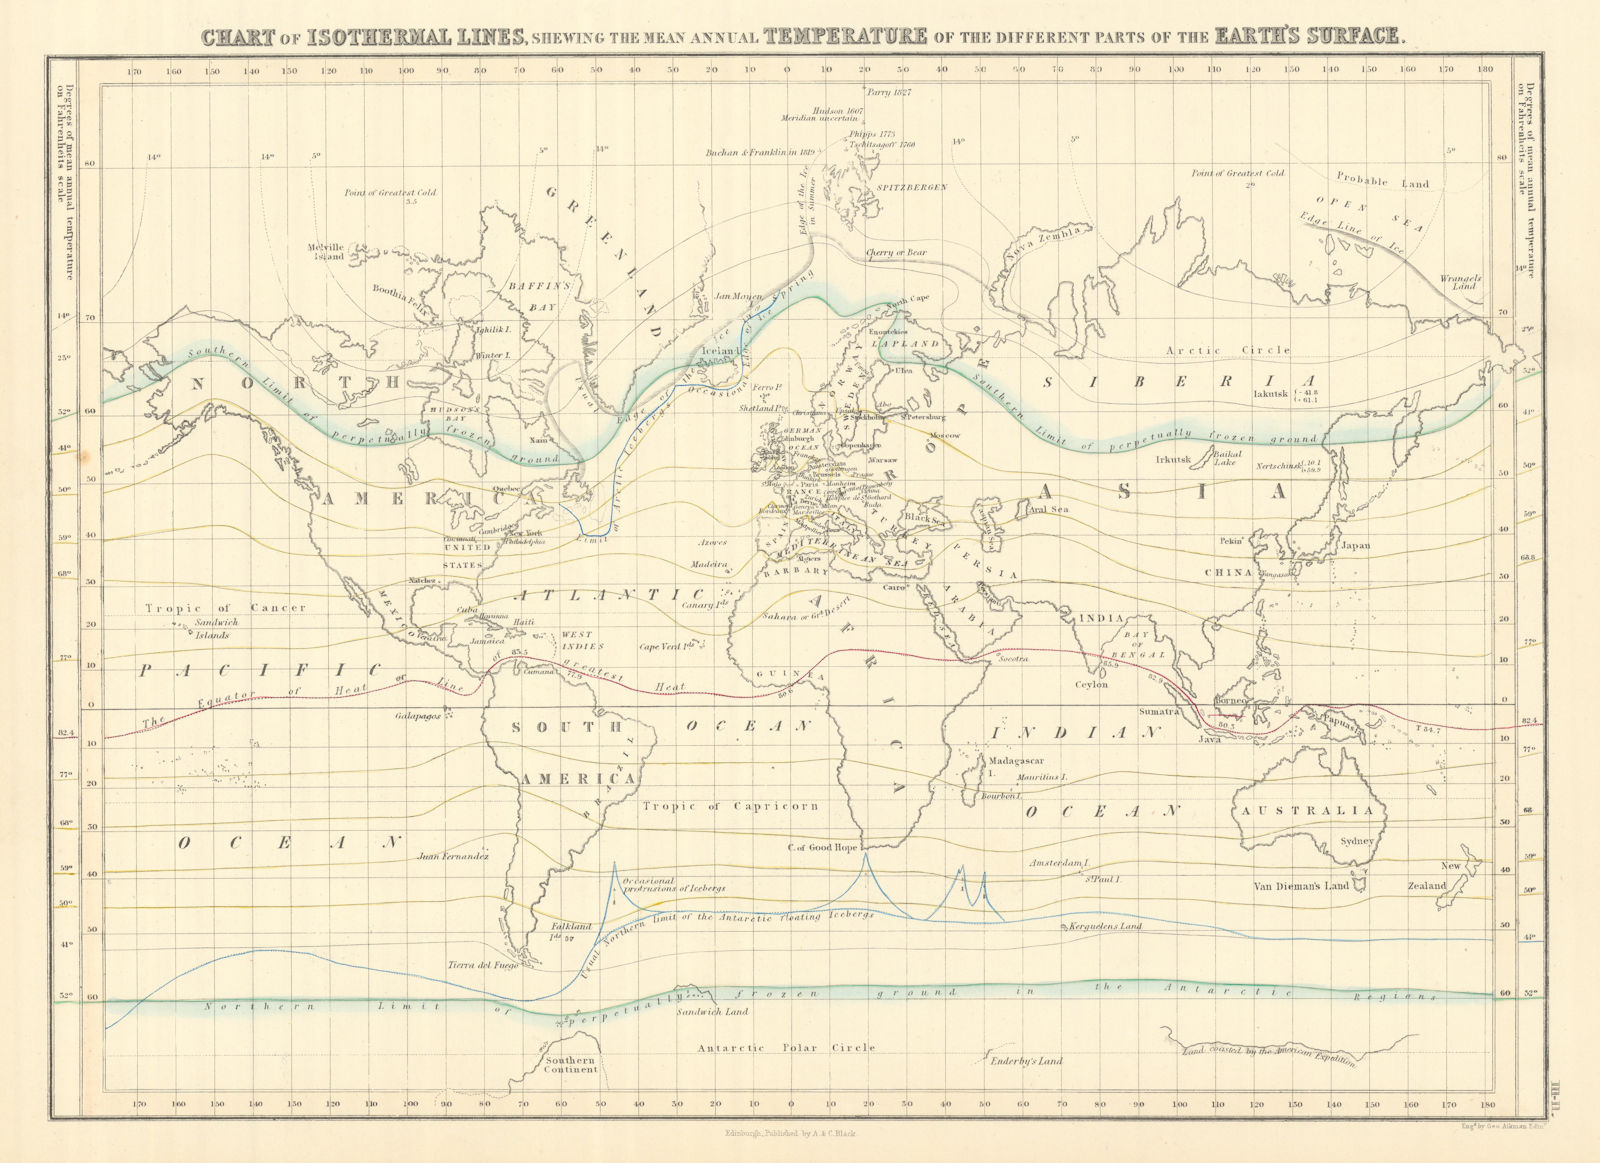 World chart of isothermal lines. Mean annual temperature. GEORGE AIKMAN 1854 map